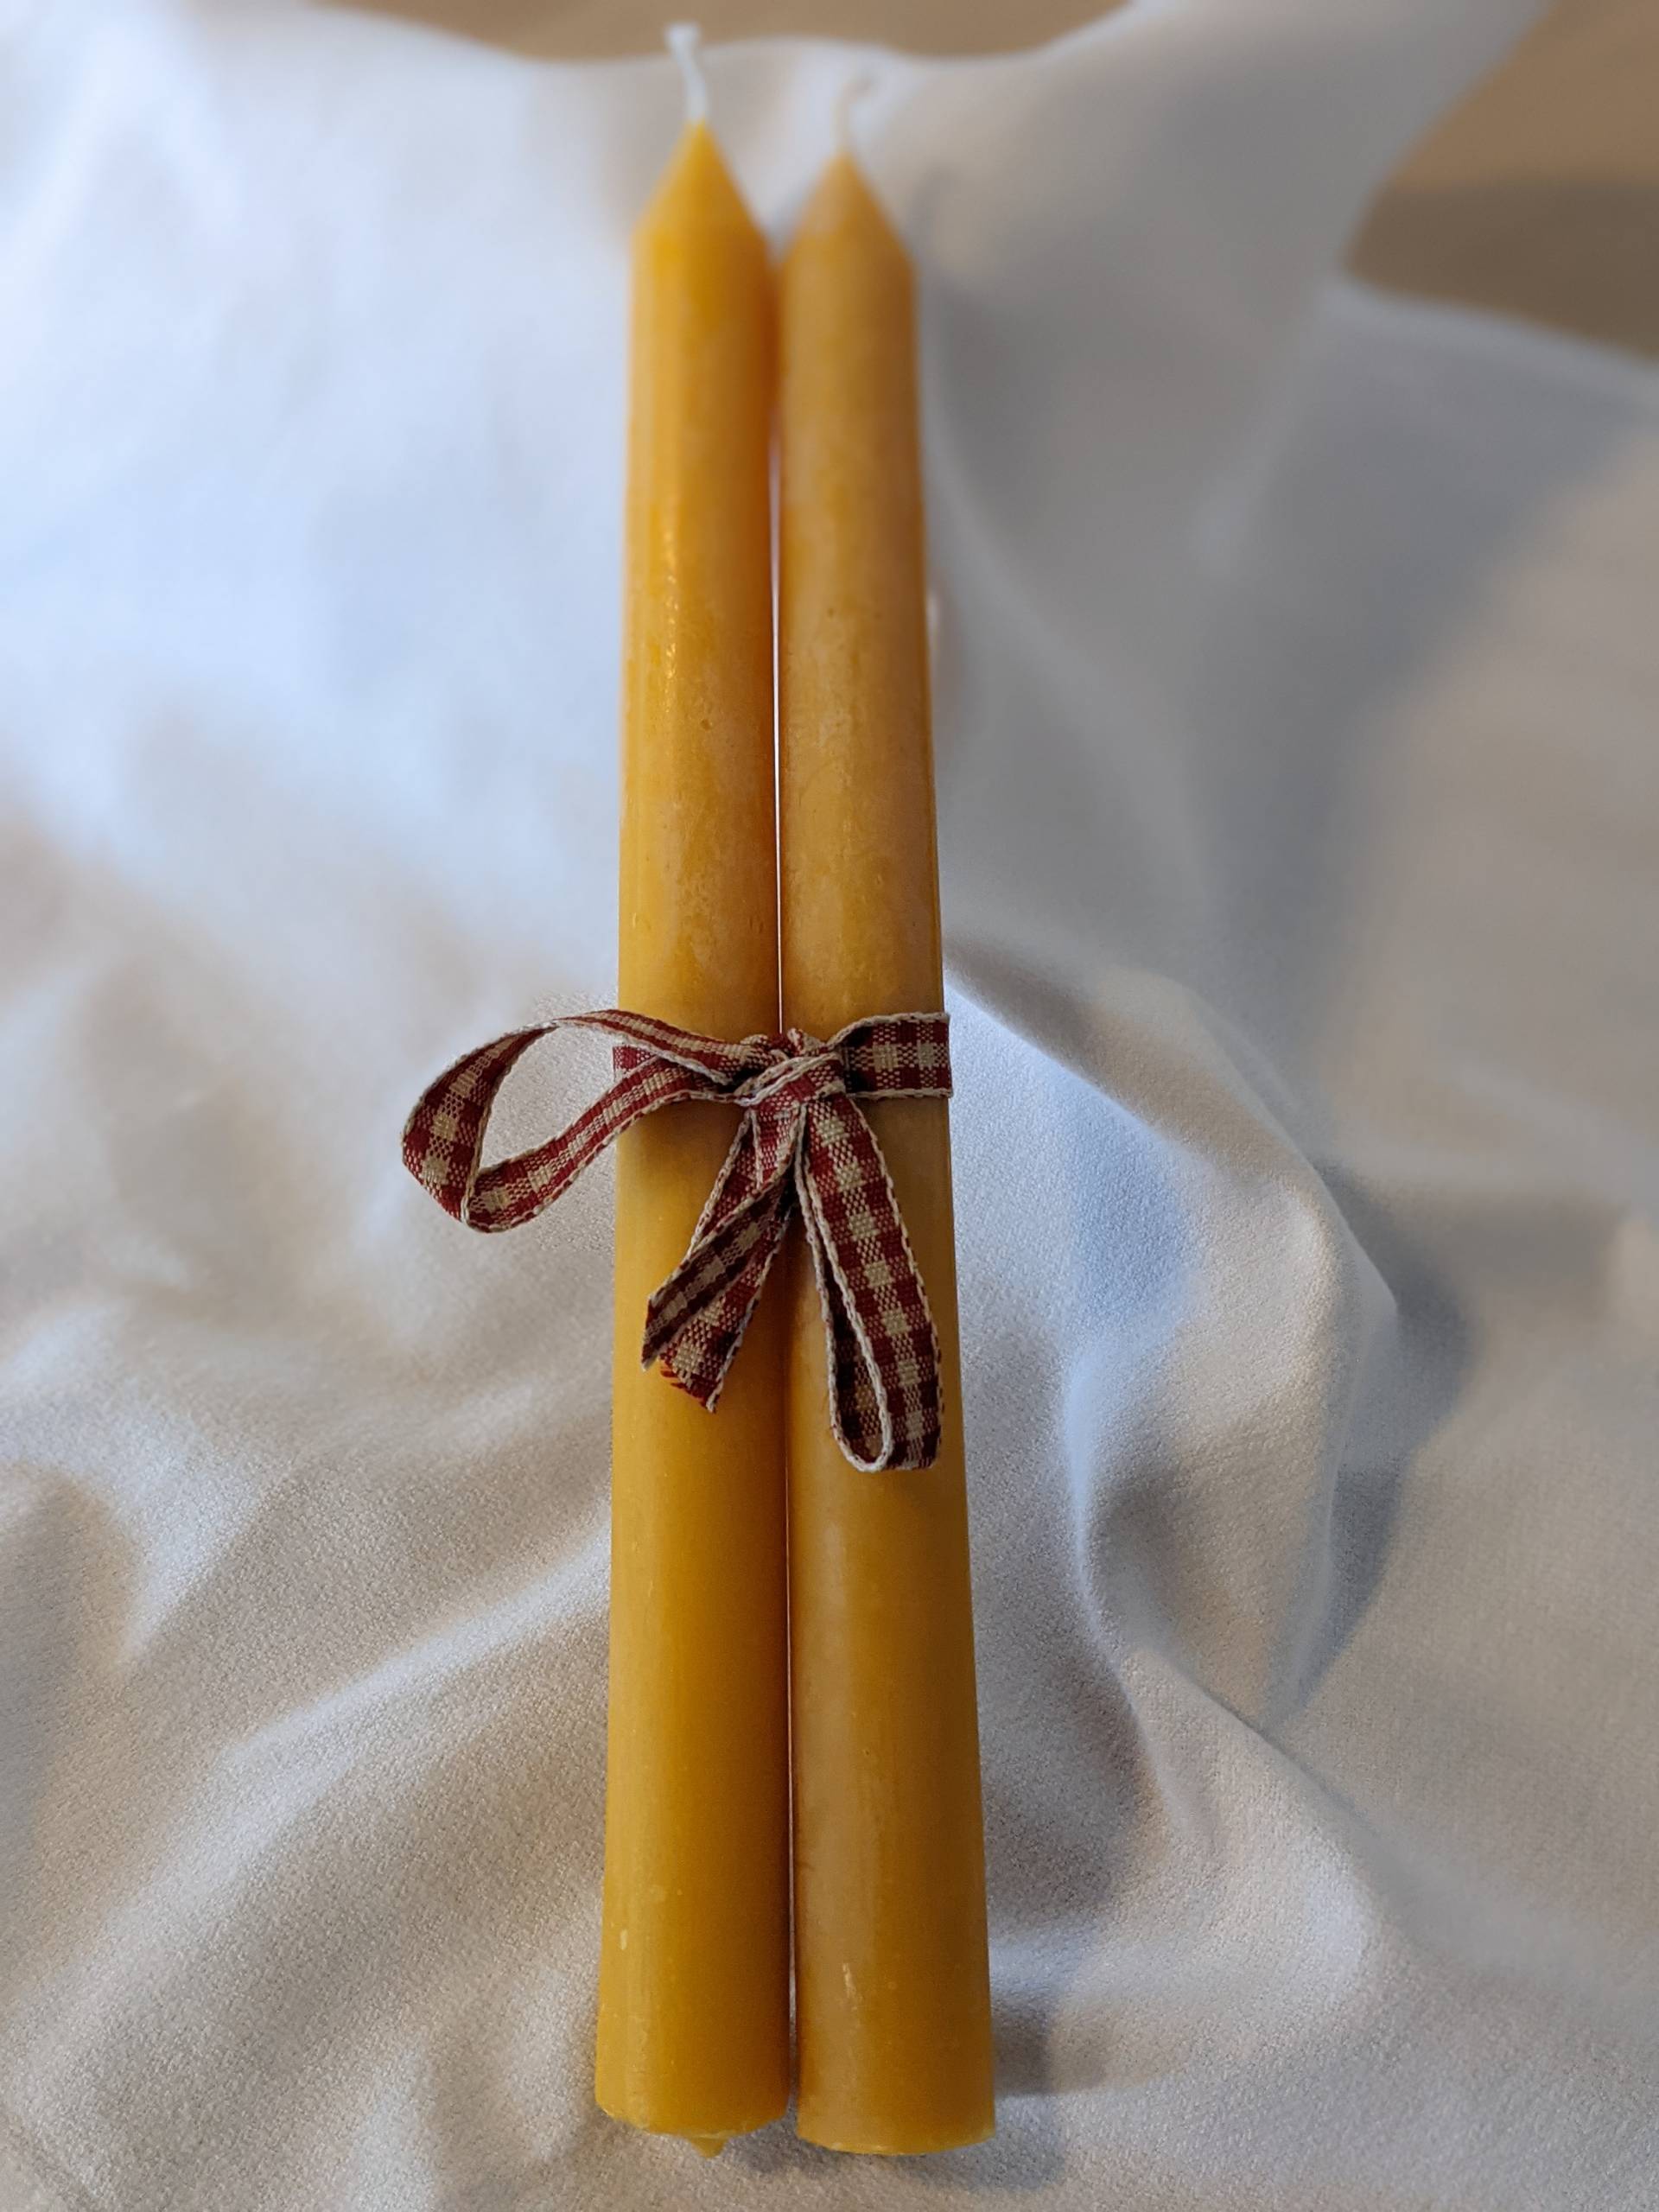 Handmade beeswax candles (2 for $15)